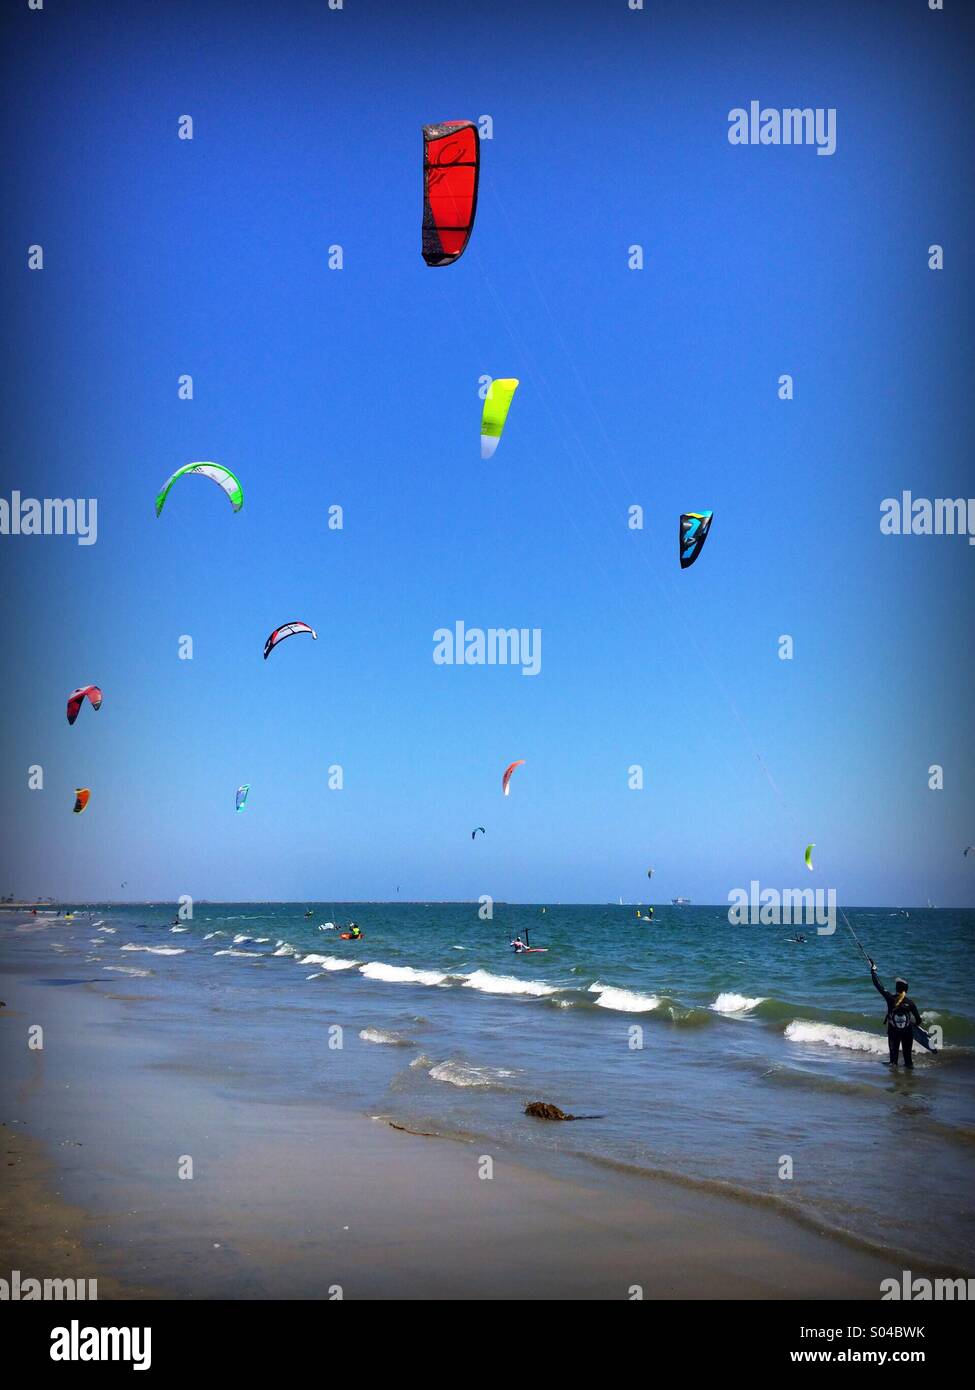 Brightly colored kites controlled by kite surfers at Belmont shores California Stock Photo